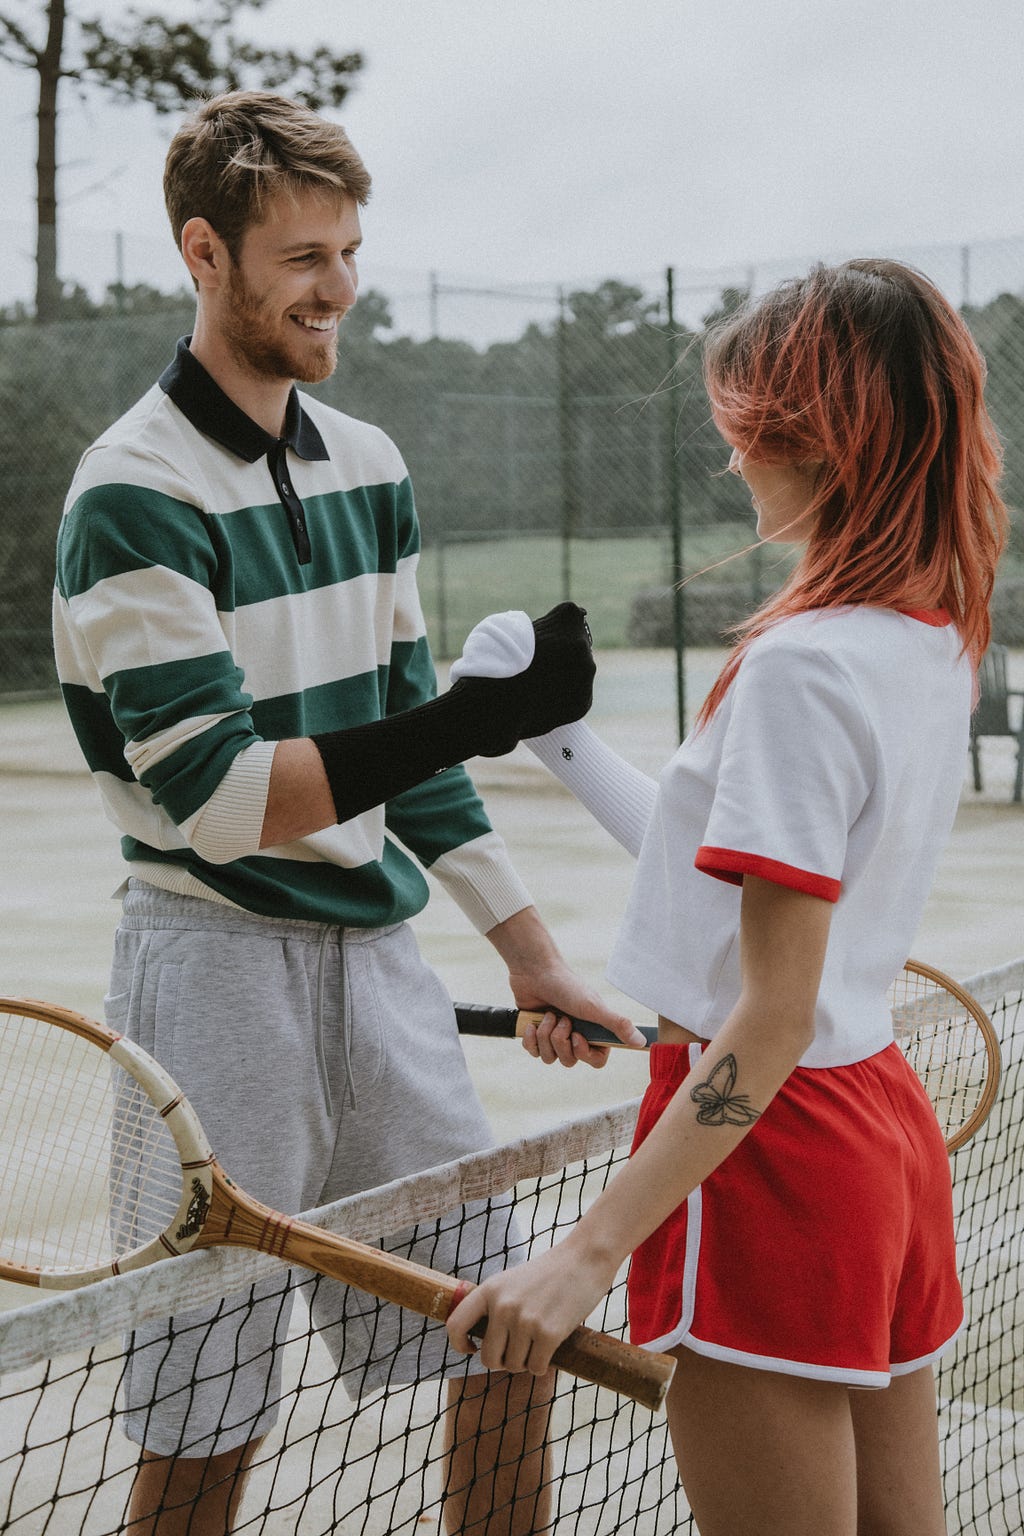 Two Lawn Tennis opponents, a male, and a female, shake their hands at the net.